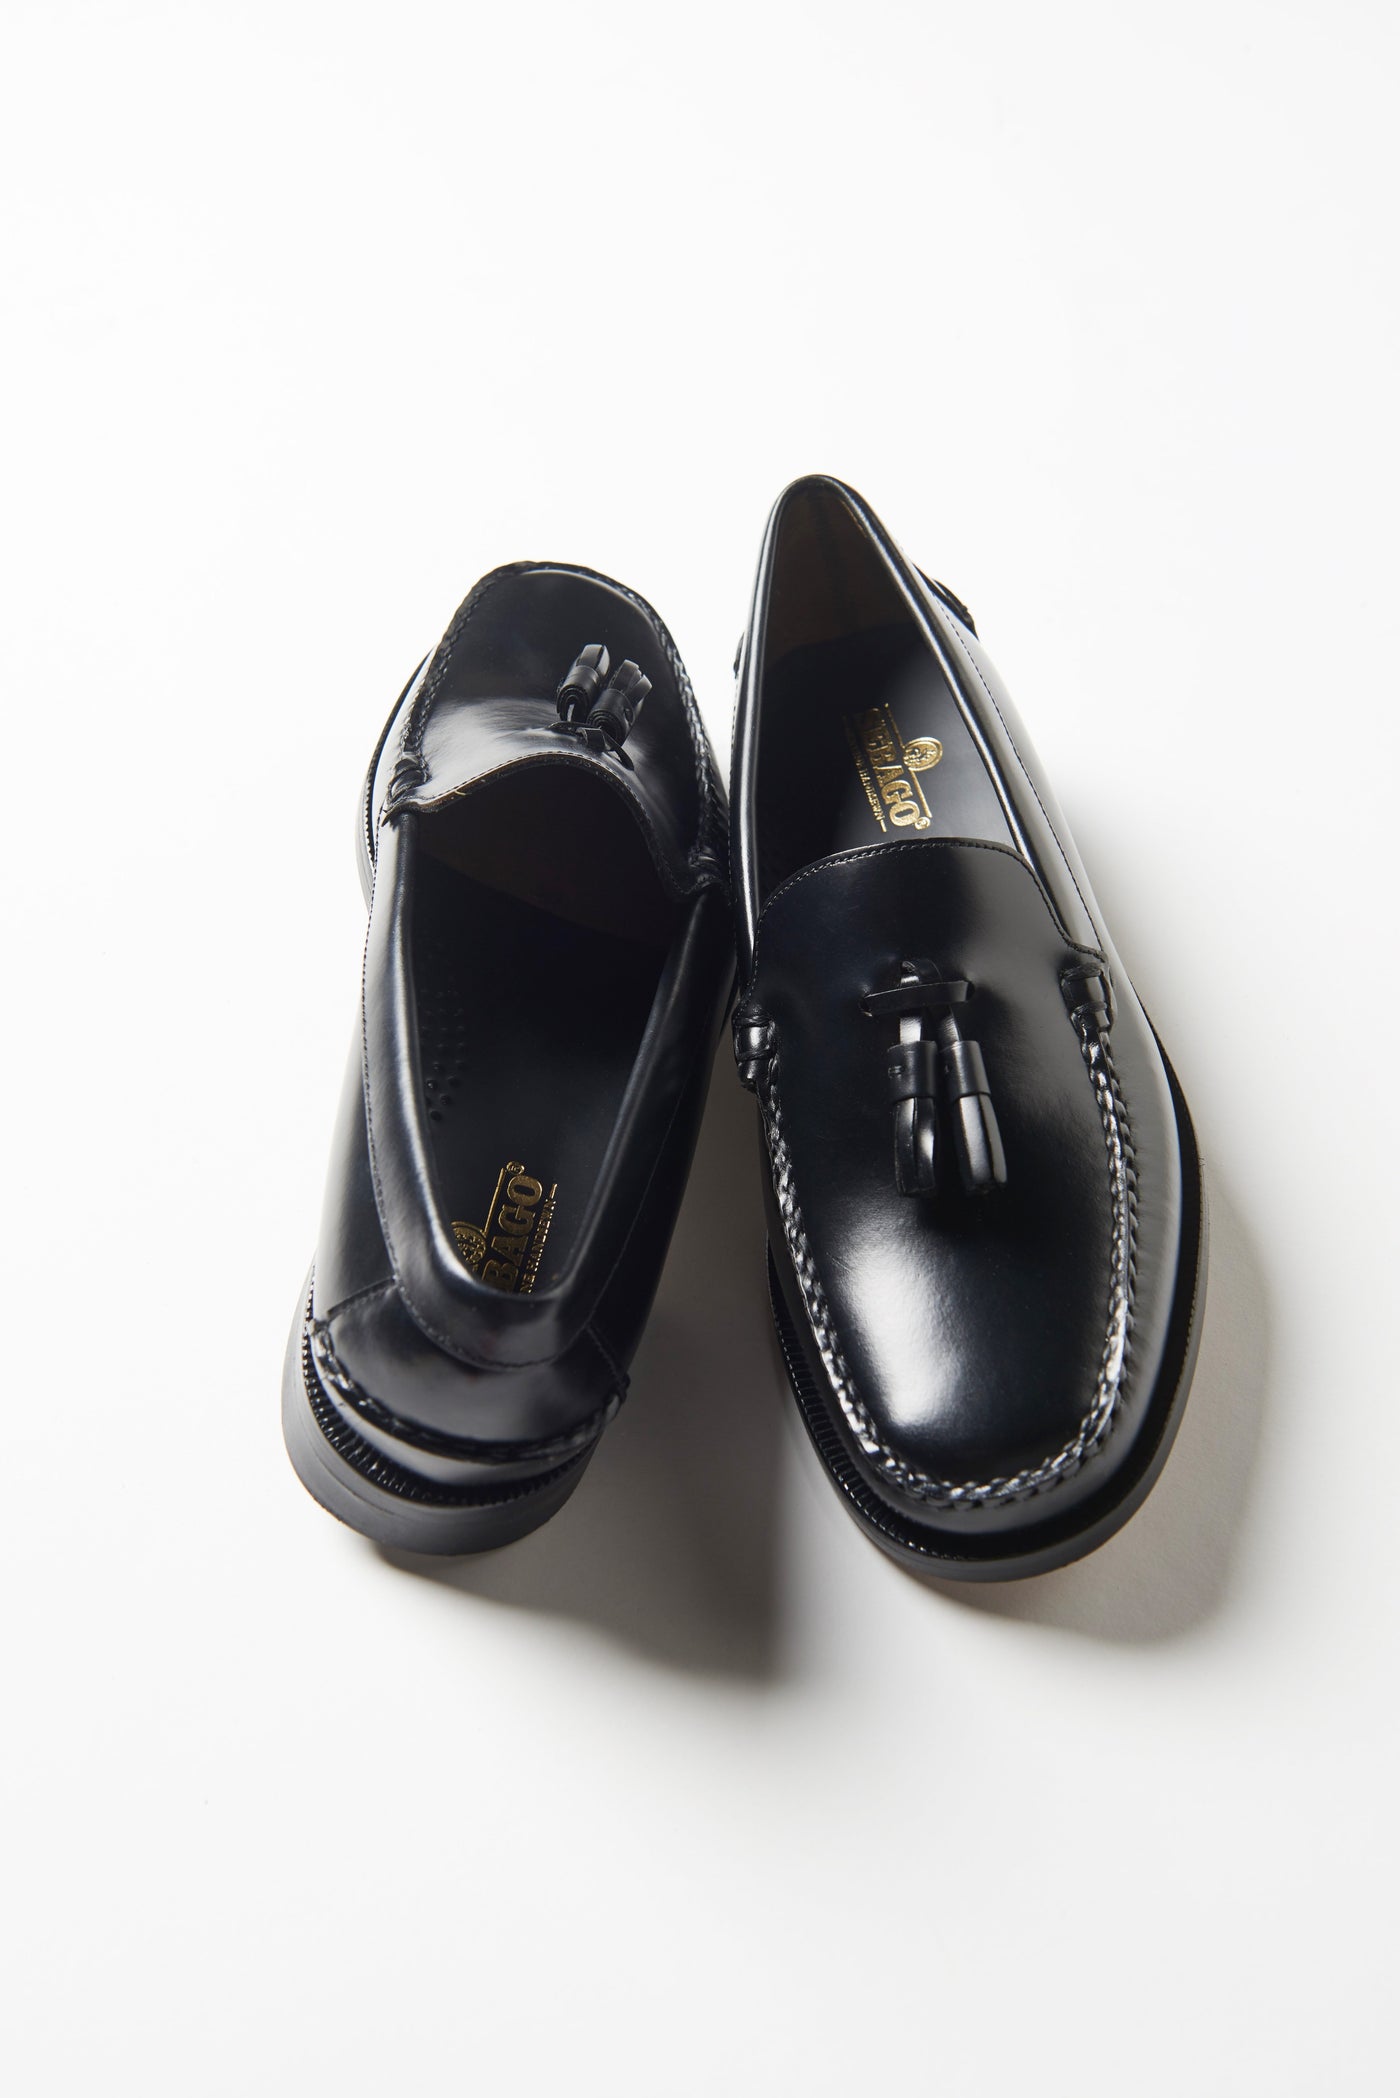 Men's Loafers | Sebago | Citysides | Classic Will | Black | Pair Top View